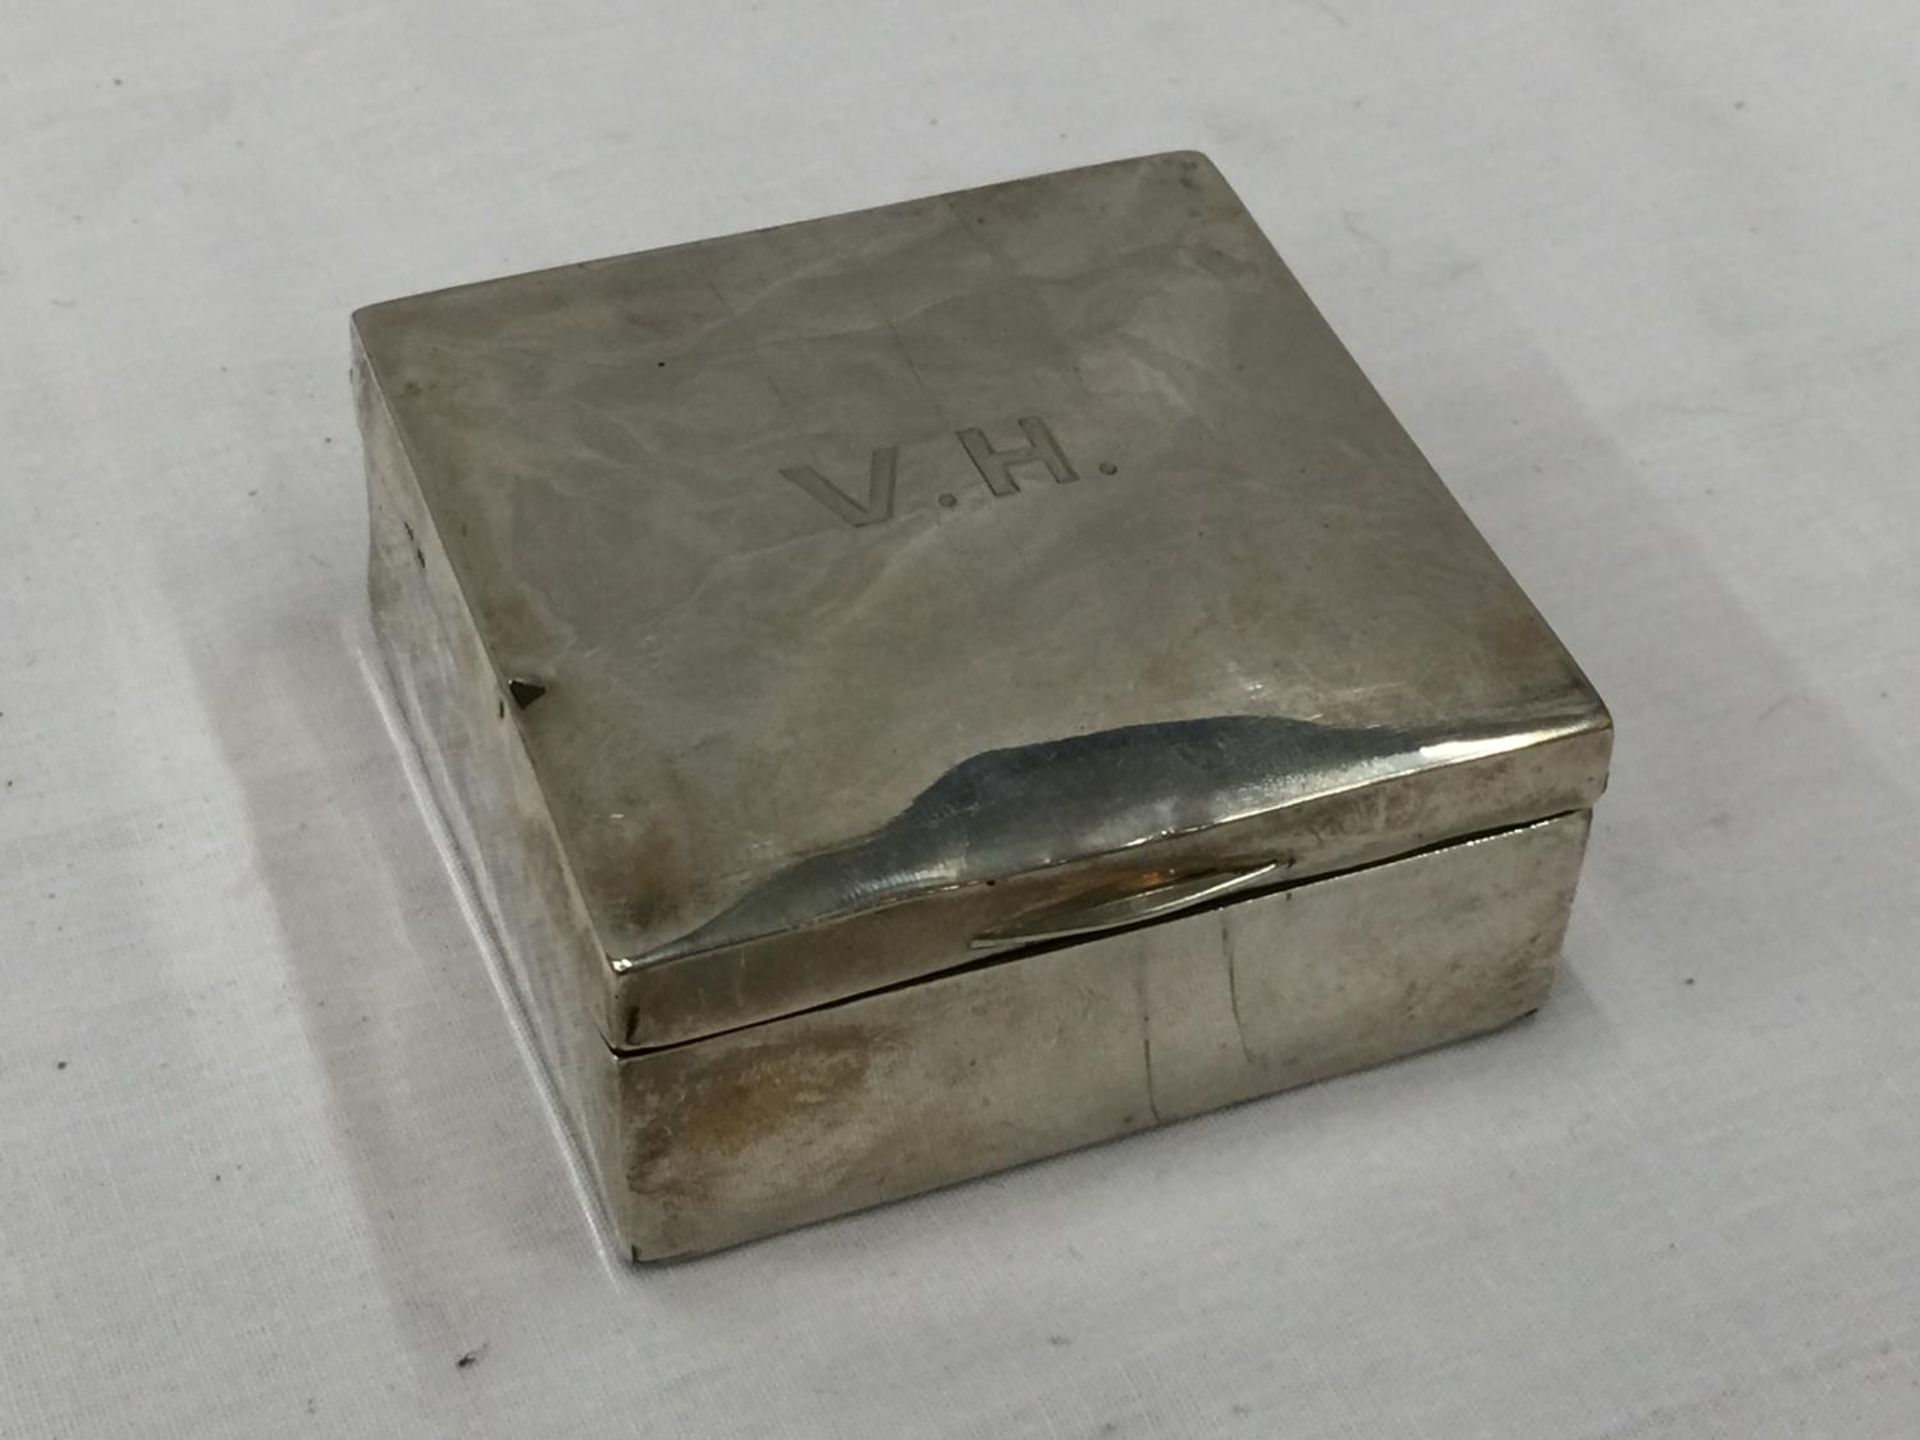 A HALLMARKED (INDISTINCT) SILVER TRINKET BOX WITH WOODEN LINING. WEIGHT: 234 GRAMS - Image 2 of 8